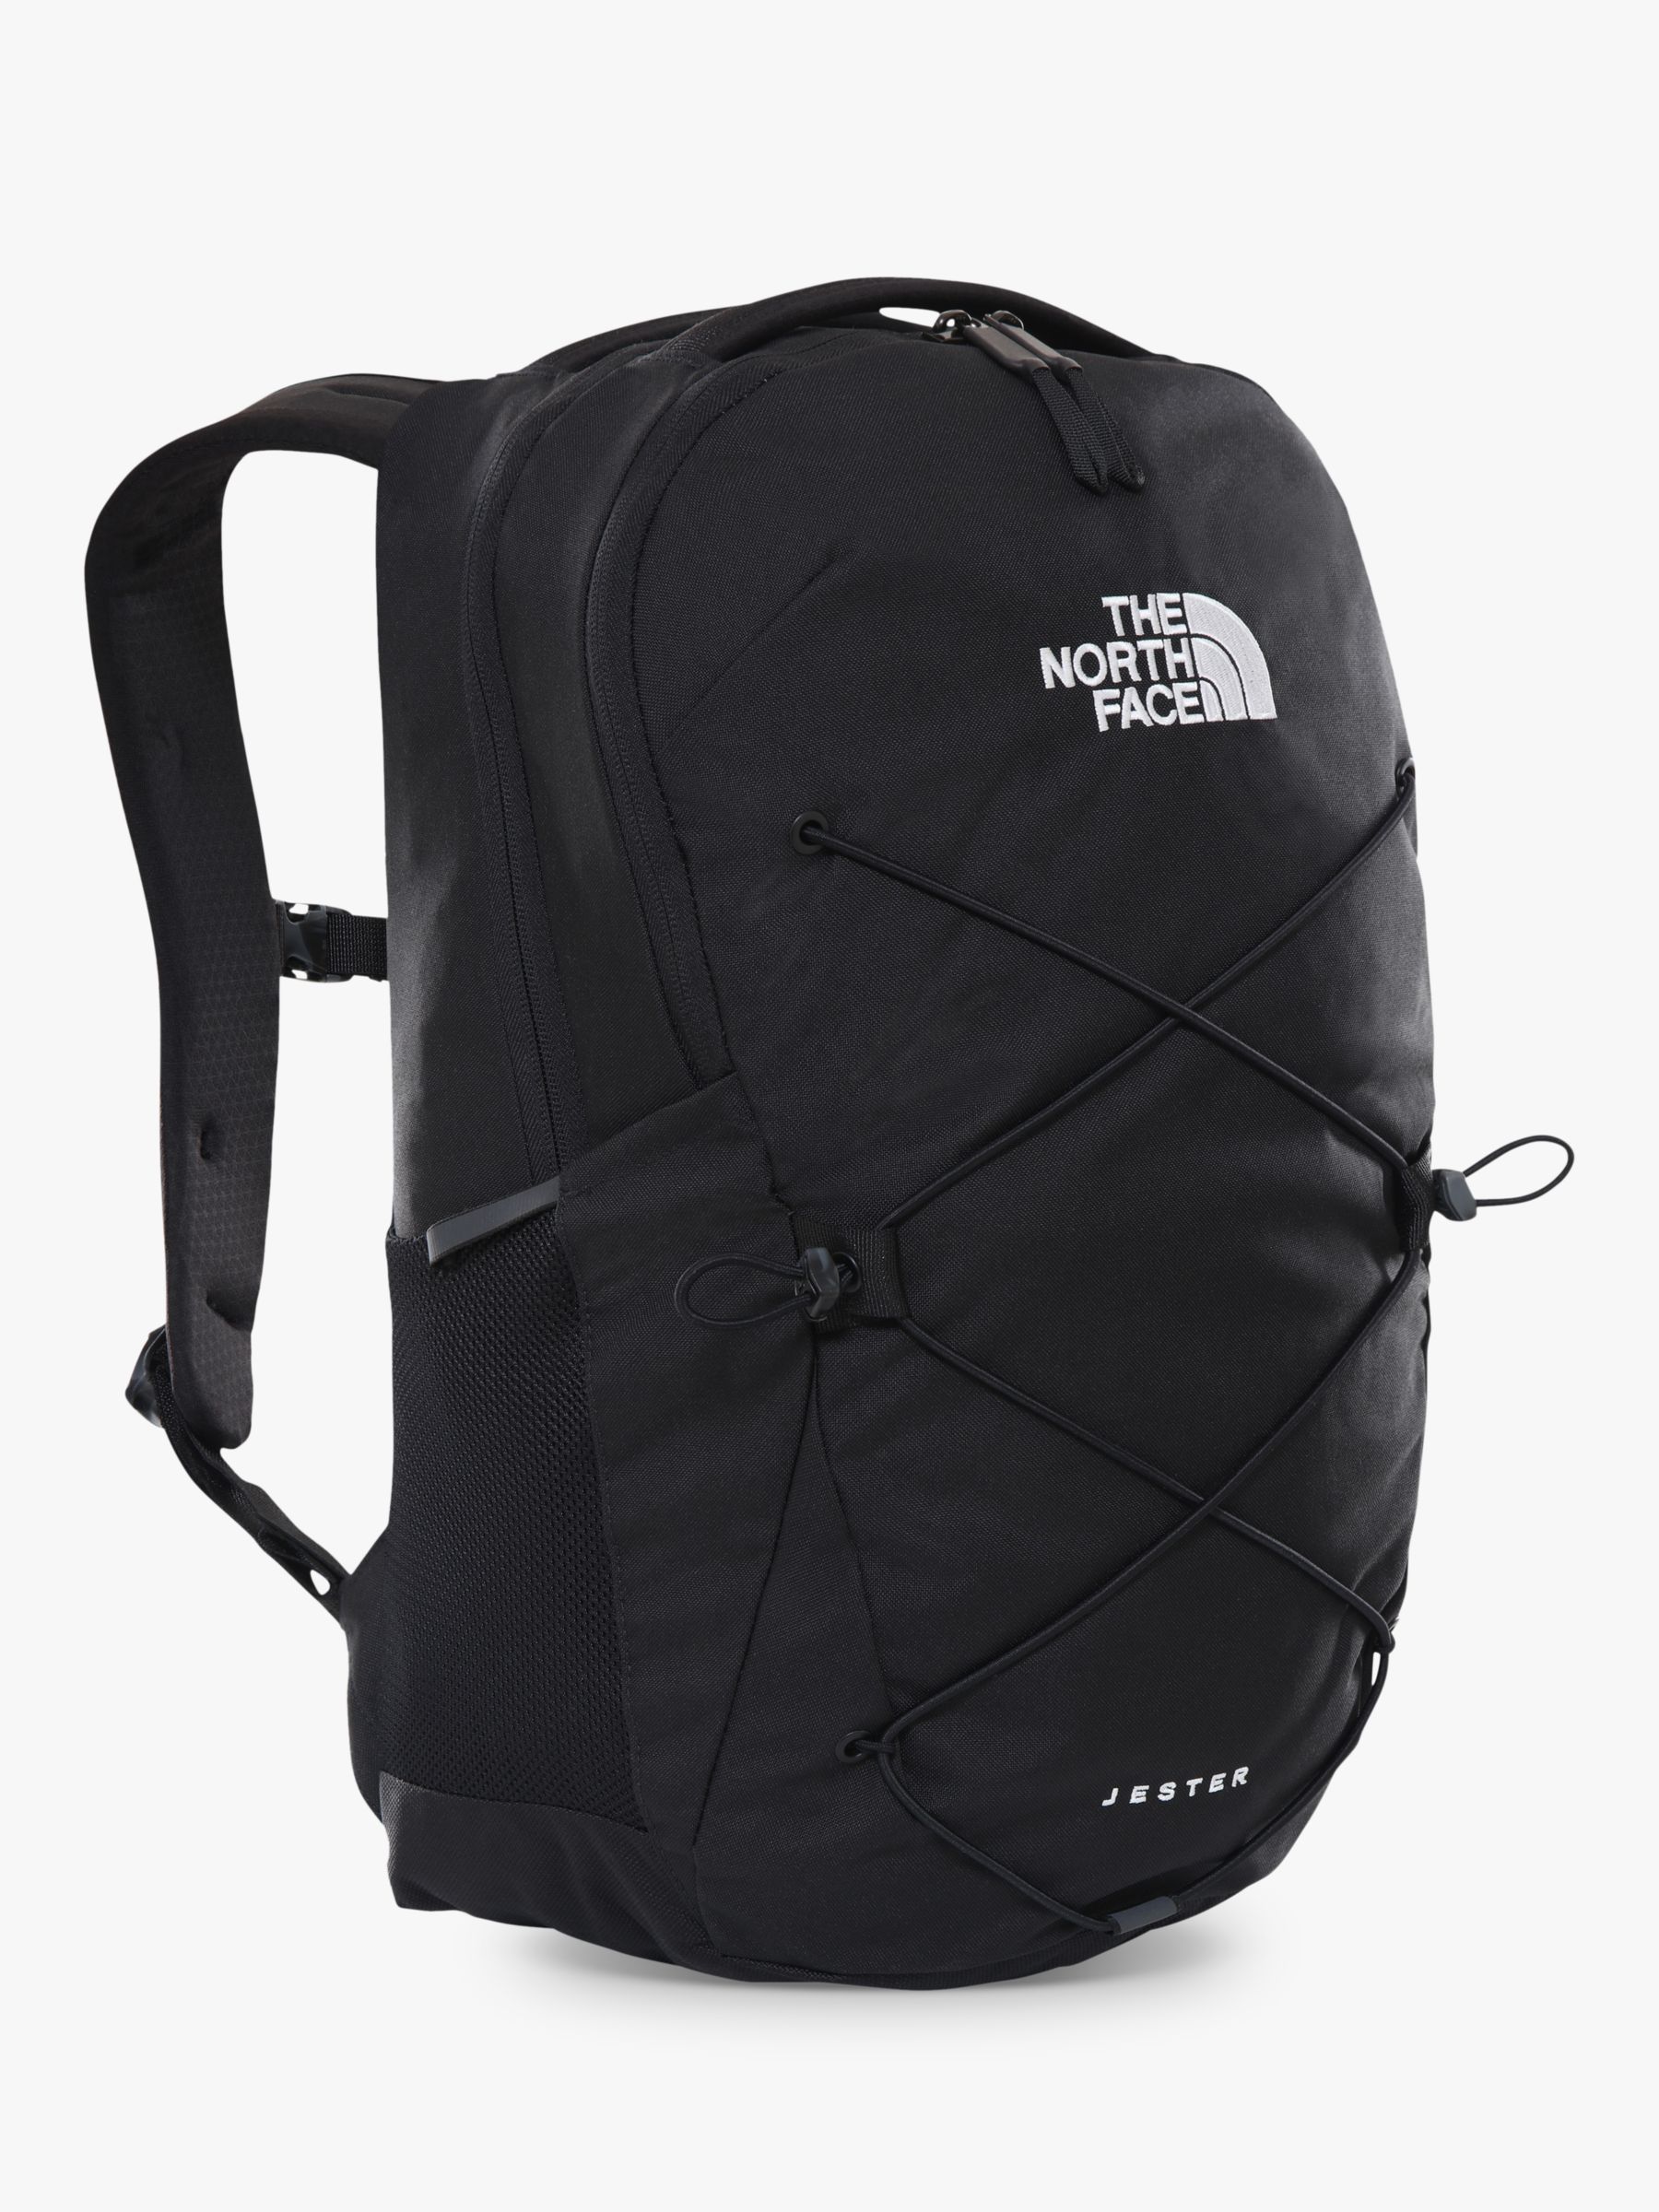 north face jester backpack navy blue